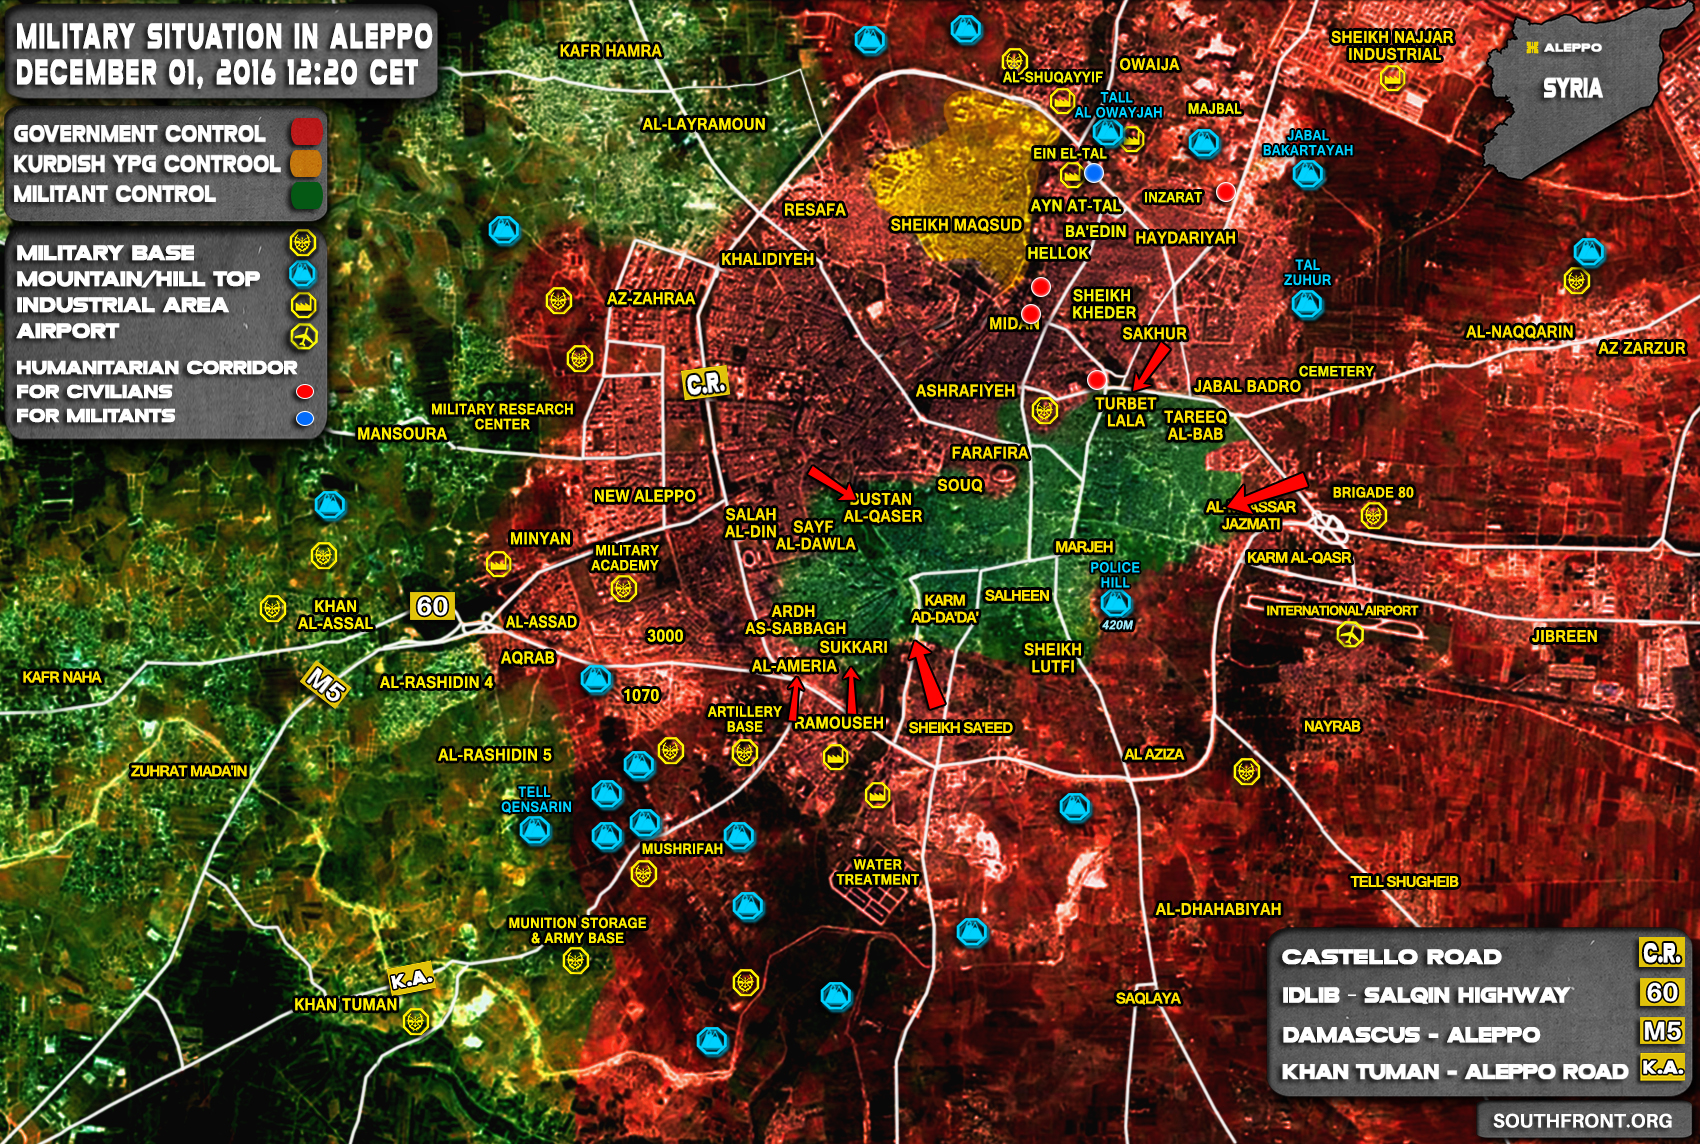 Overview of Military Situation in Aleppo City on December 1, 2016